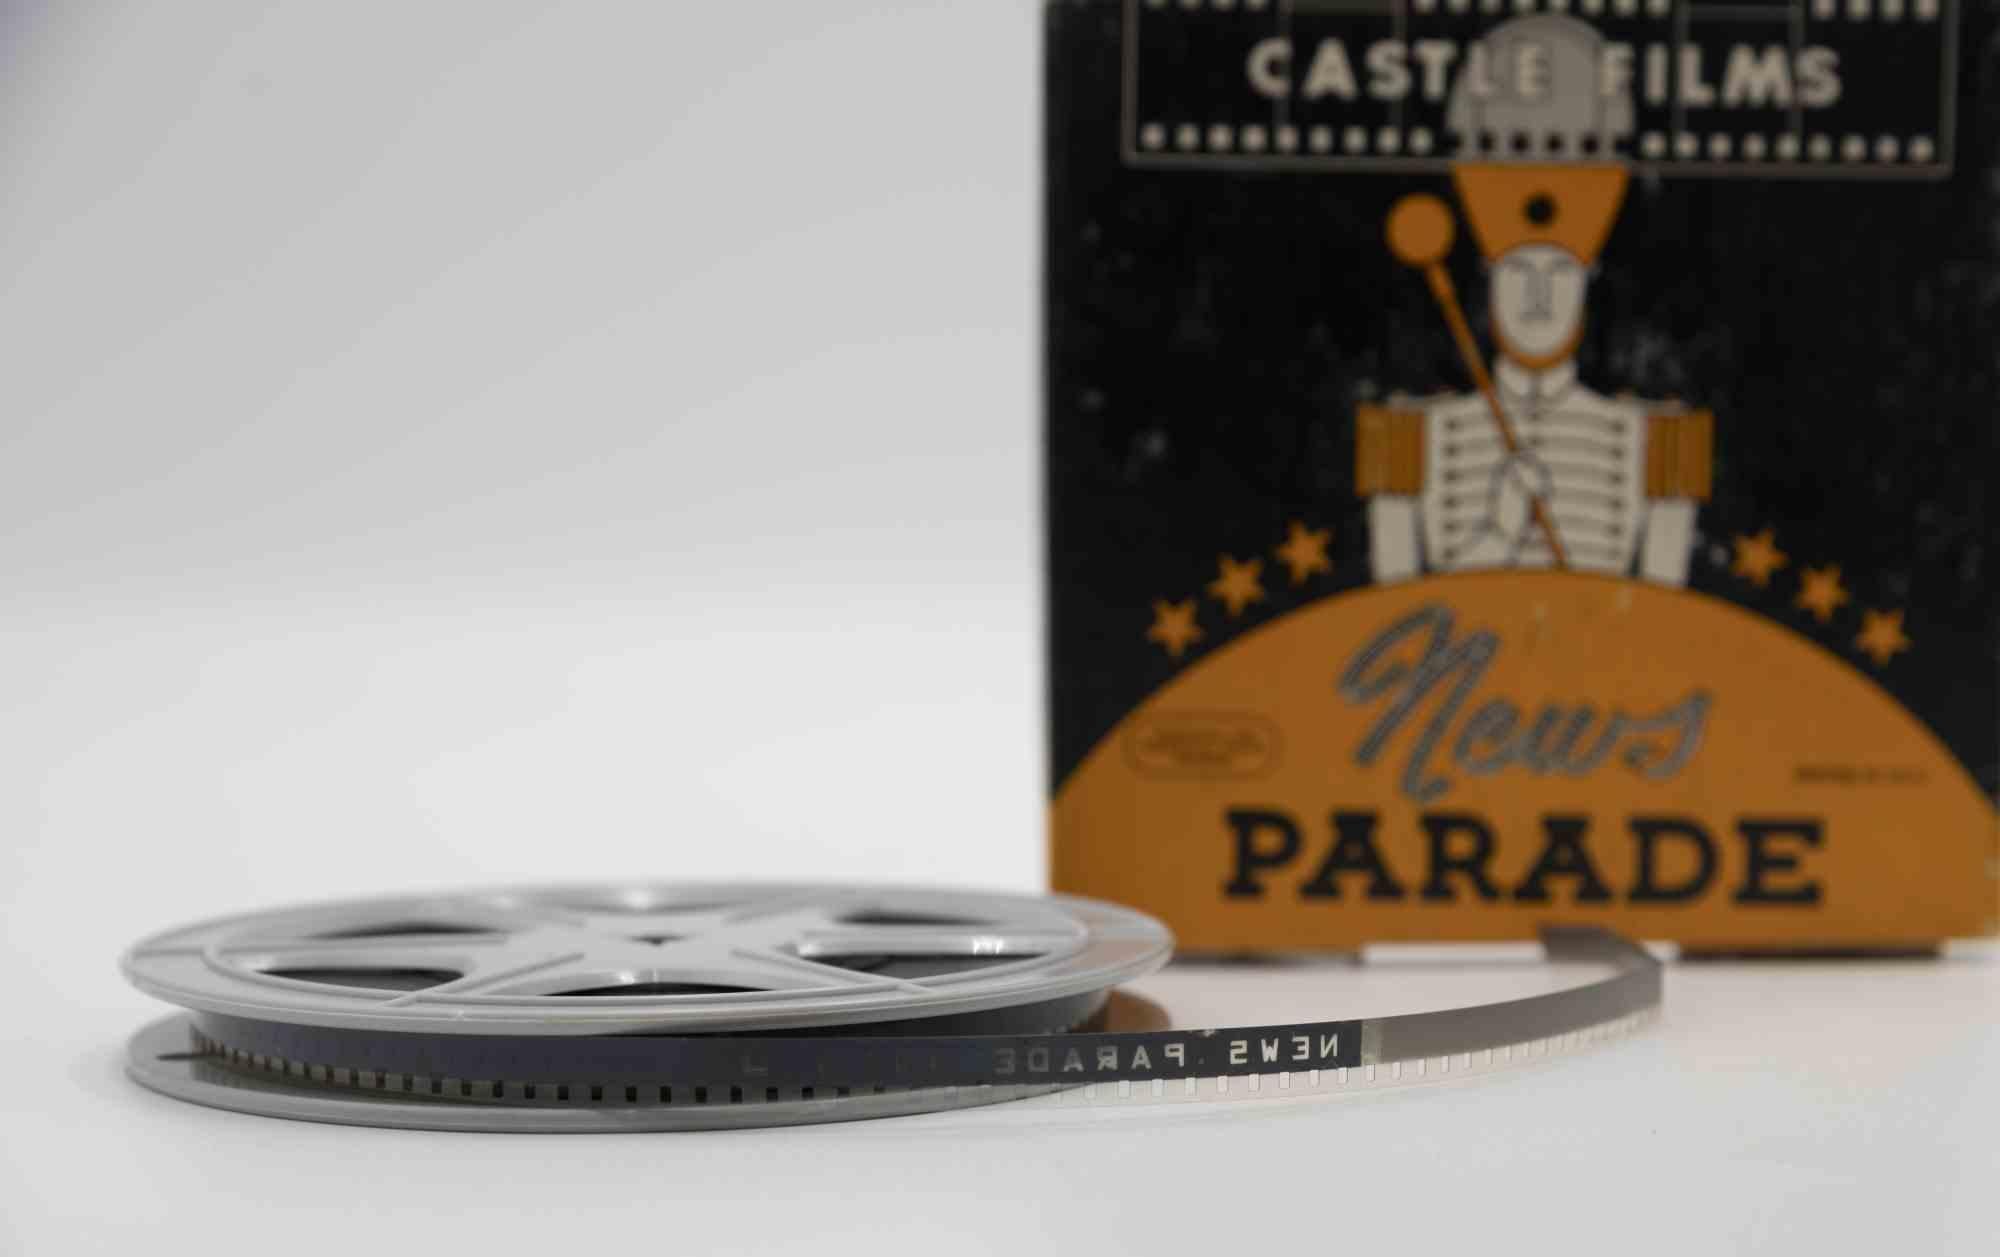 News Parade is an original film from the 1940s.

It includes original packaging.

8 mm or 16 mm.

Good conditions. 